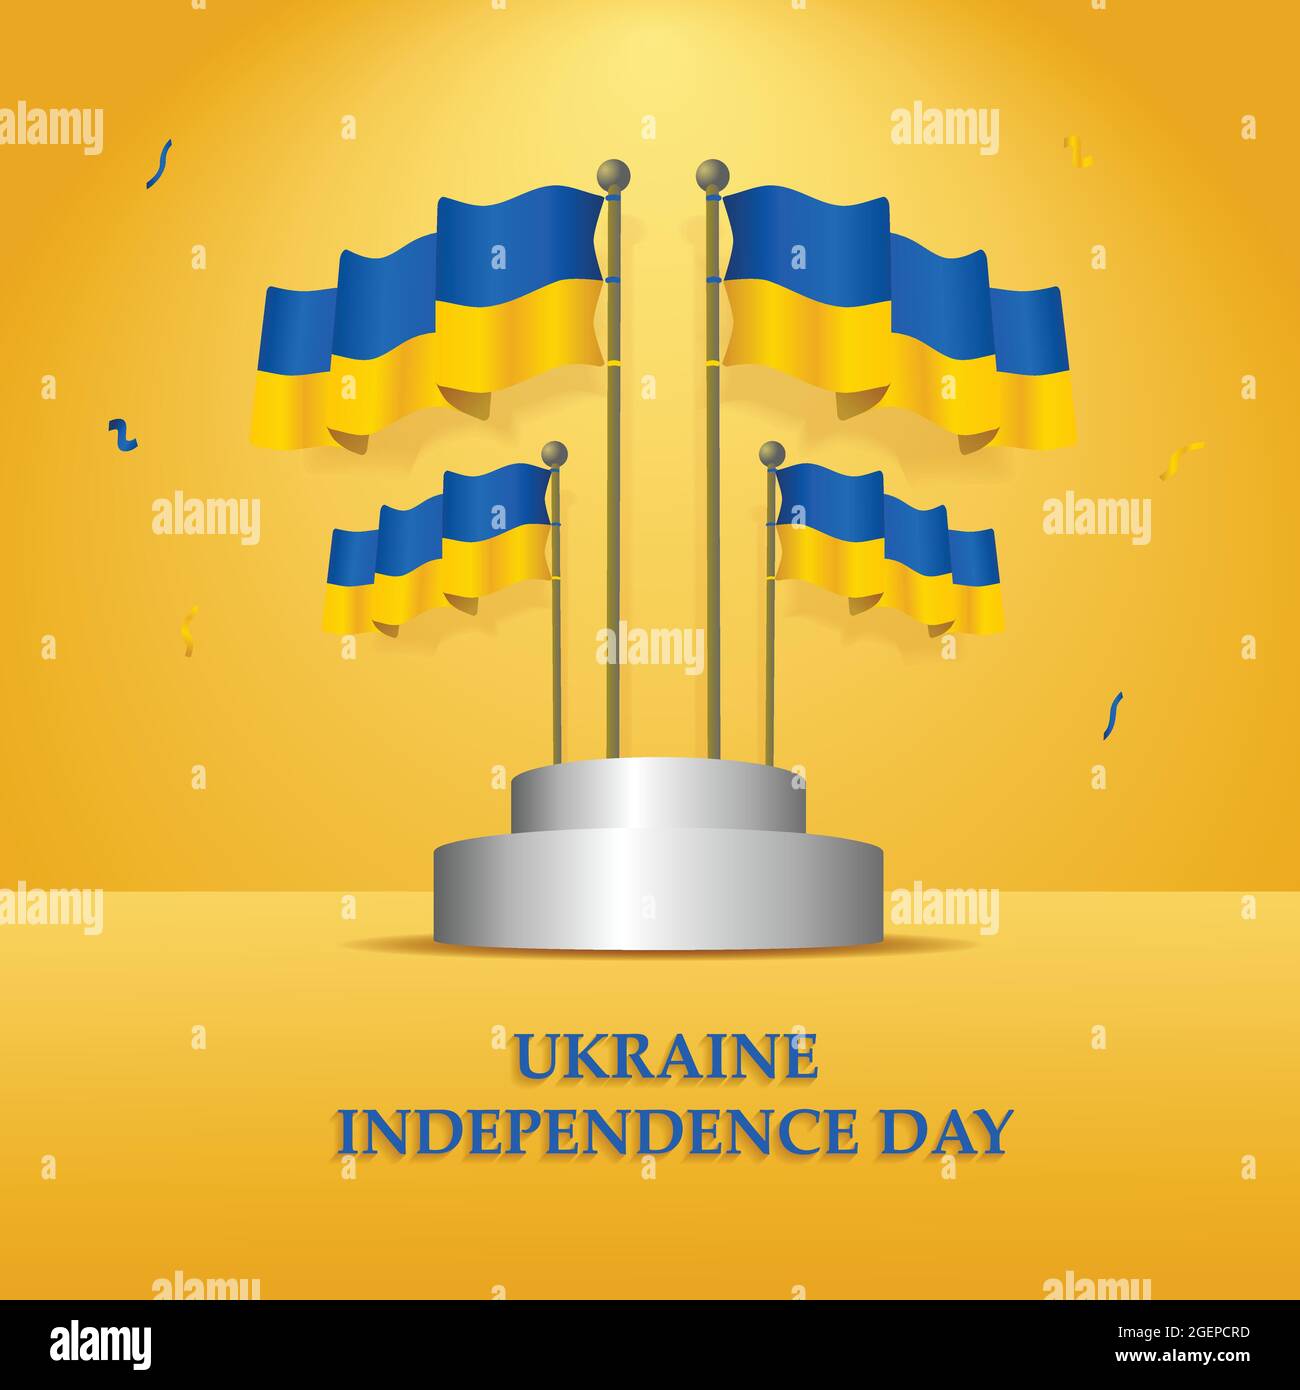 ukraine independence day vector illustration to commemorate the most important day in ukraine Stock Vector